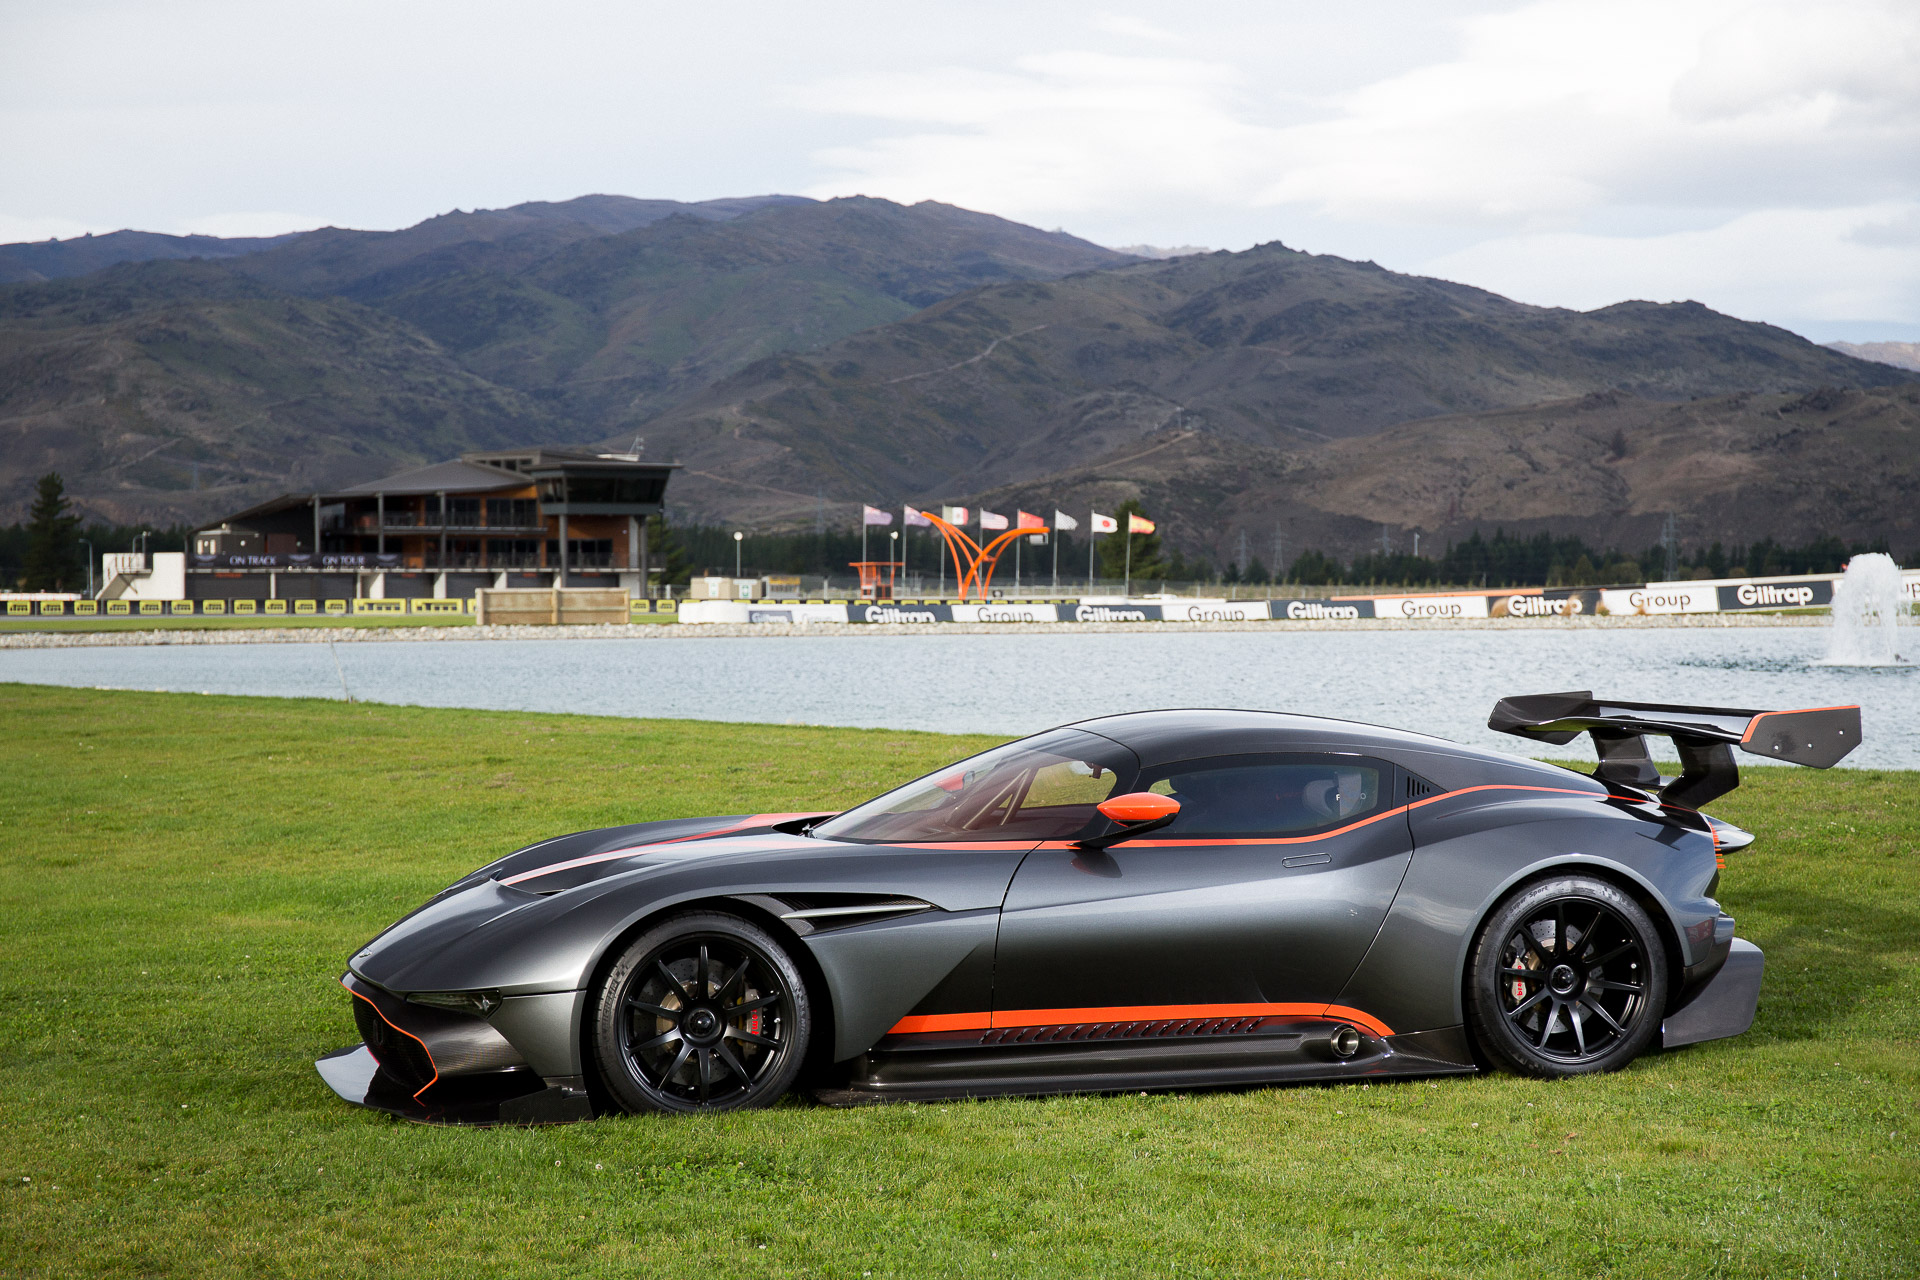 Highlands Motorsport Park takes delivery of first Aston Martin Vulcan in Southern Hemisphere